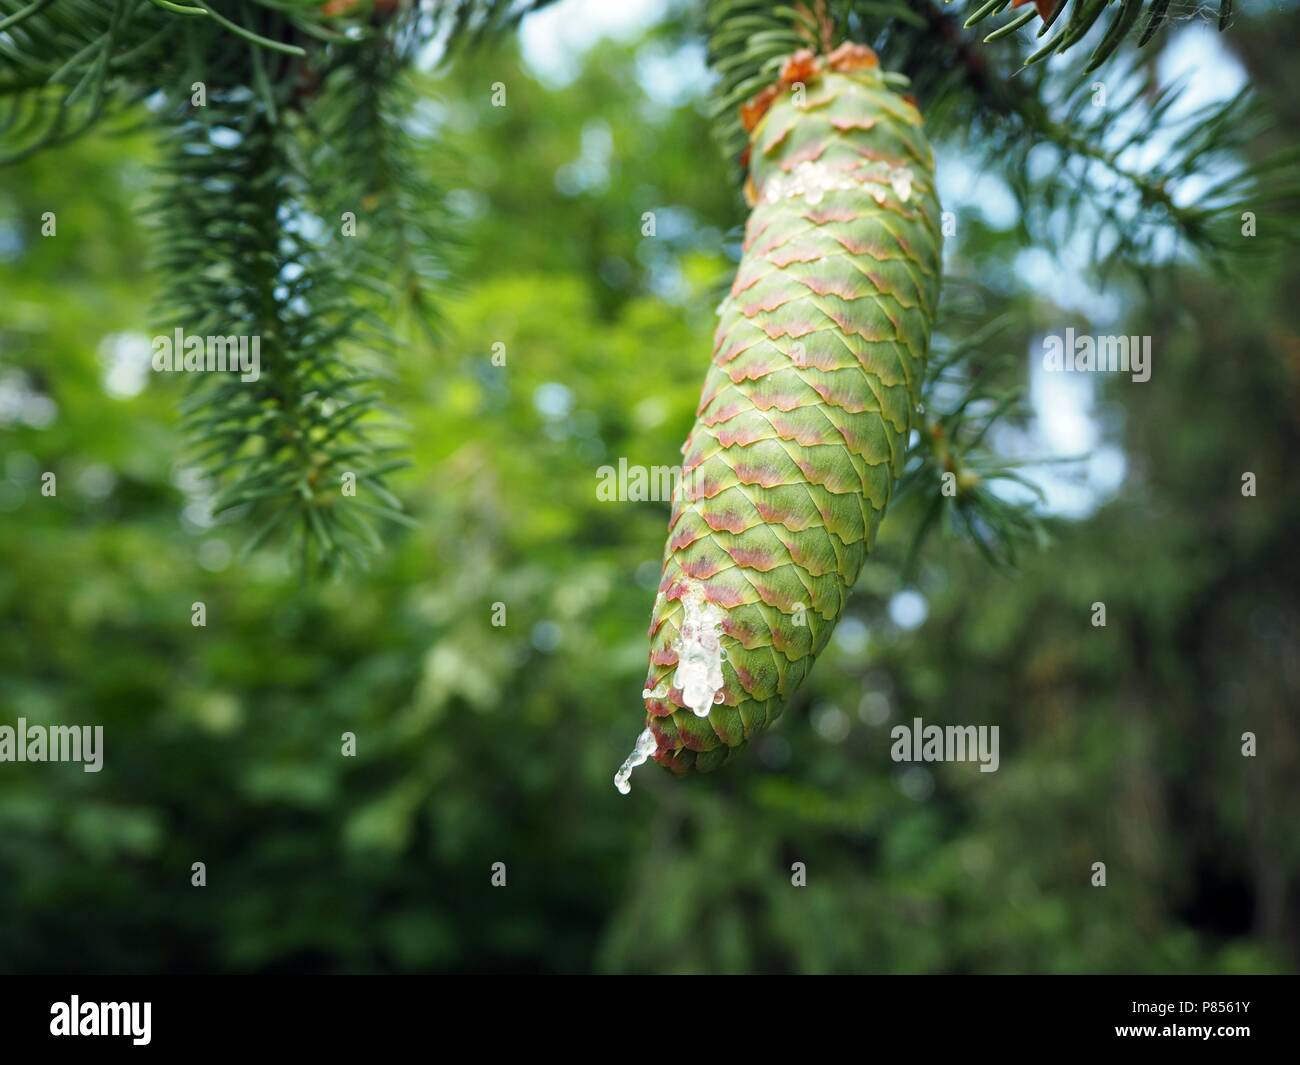 Green pine cone close up with liquid running down close up Stock Photo